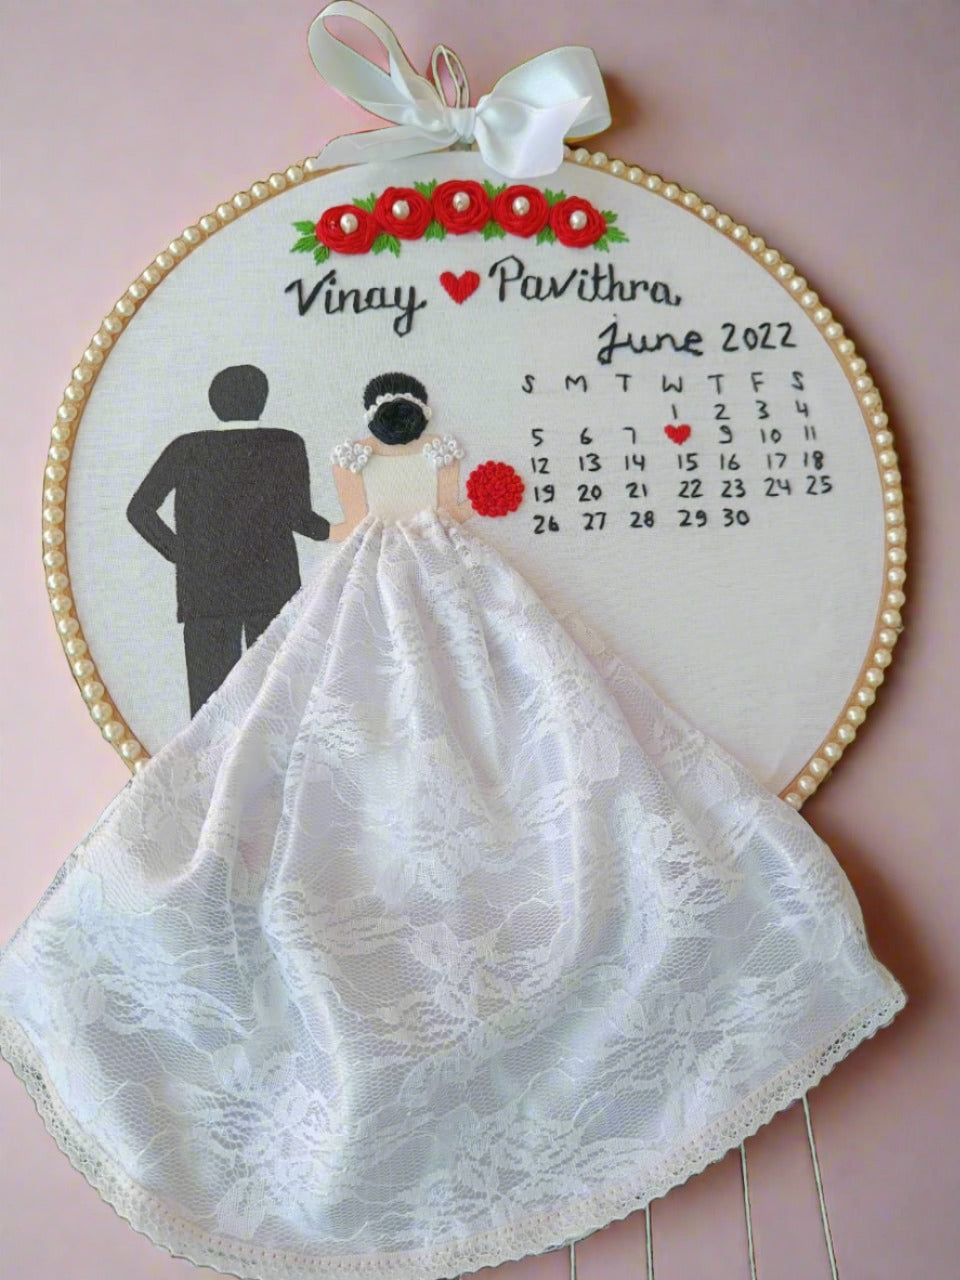 Embroidery hoop with white gown